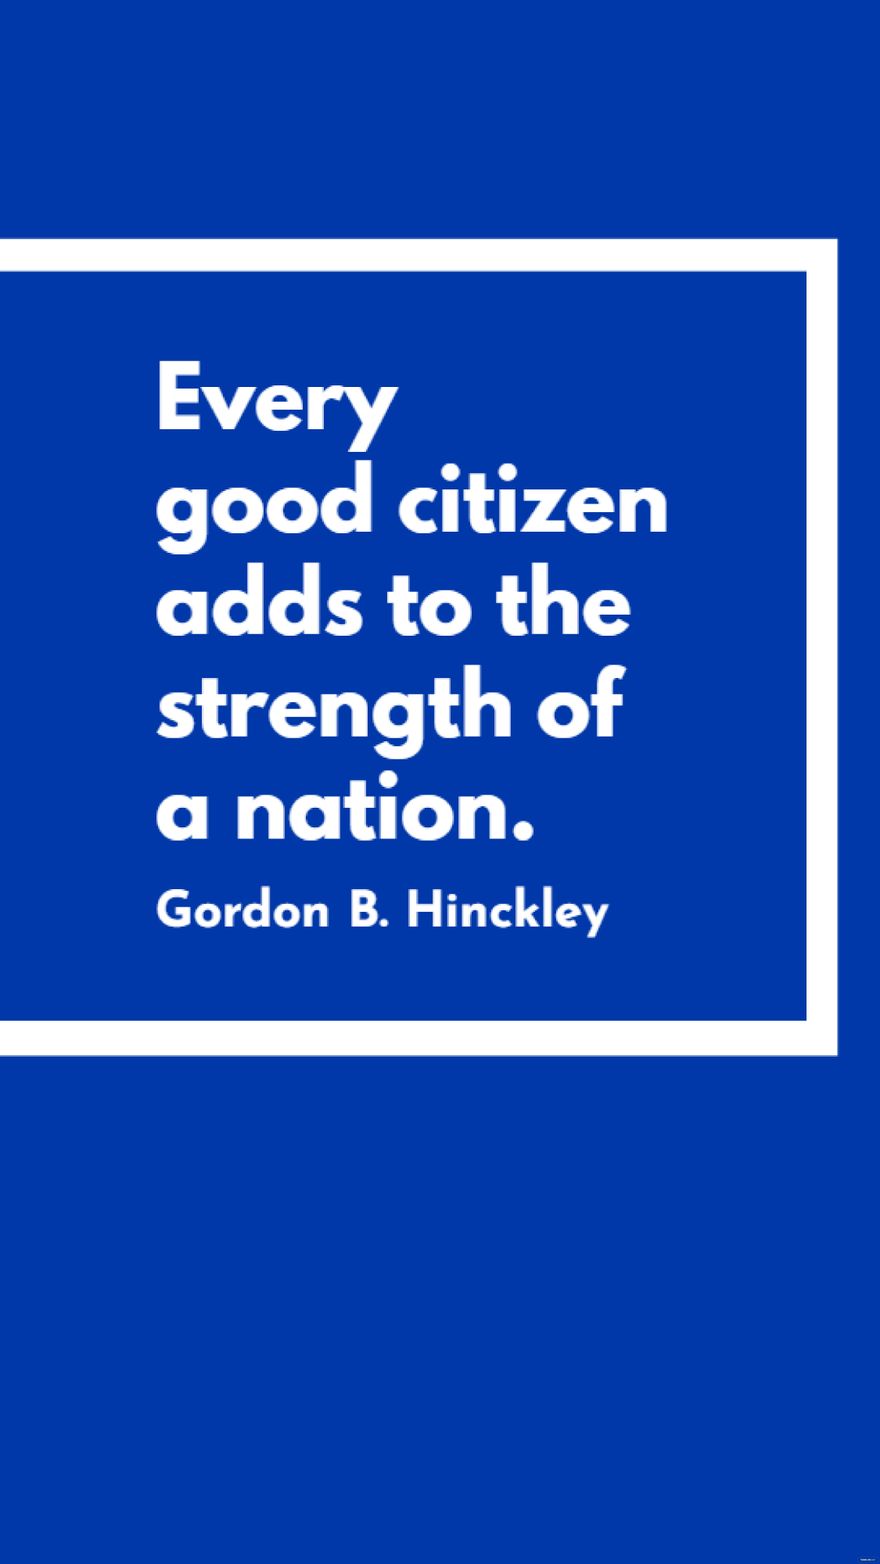 Free Gordon B. Hinckley - Every good citizen adds to the strength of a nation. in JPG